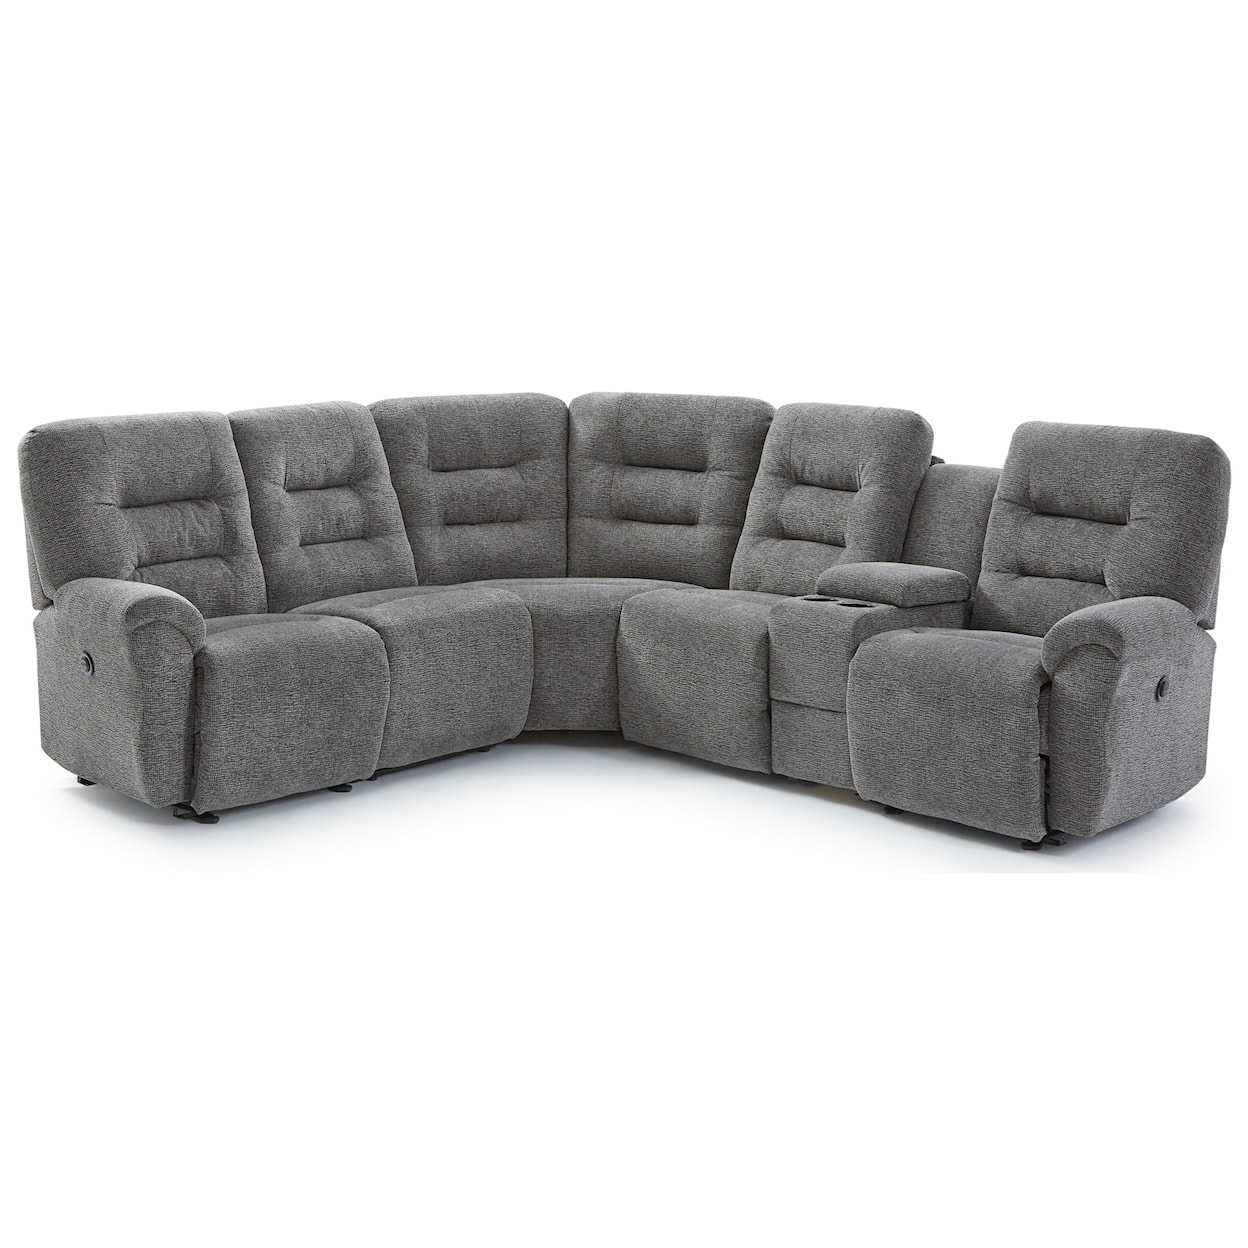 Best Home Furnishings Unity 4-Seat Reclining Sectional Sofa